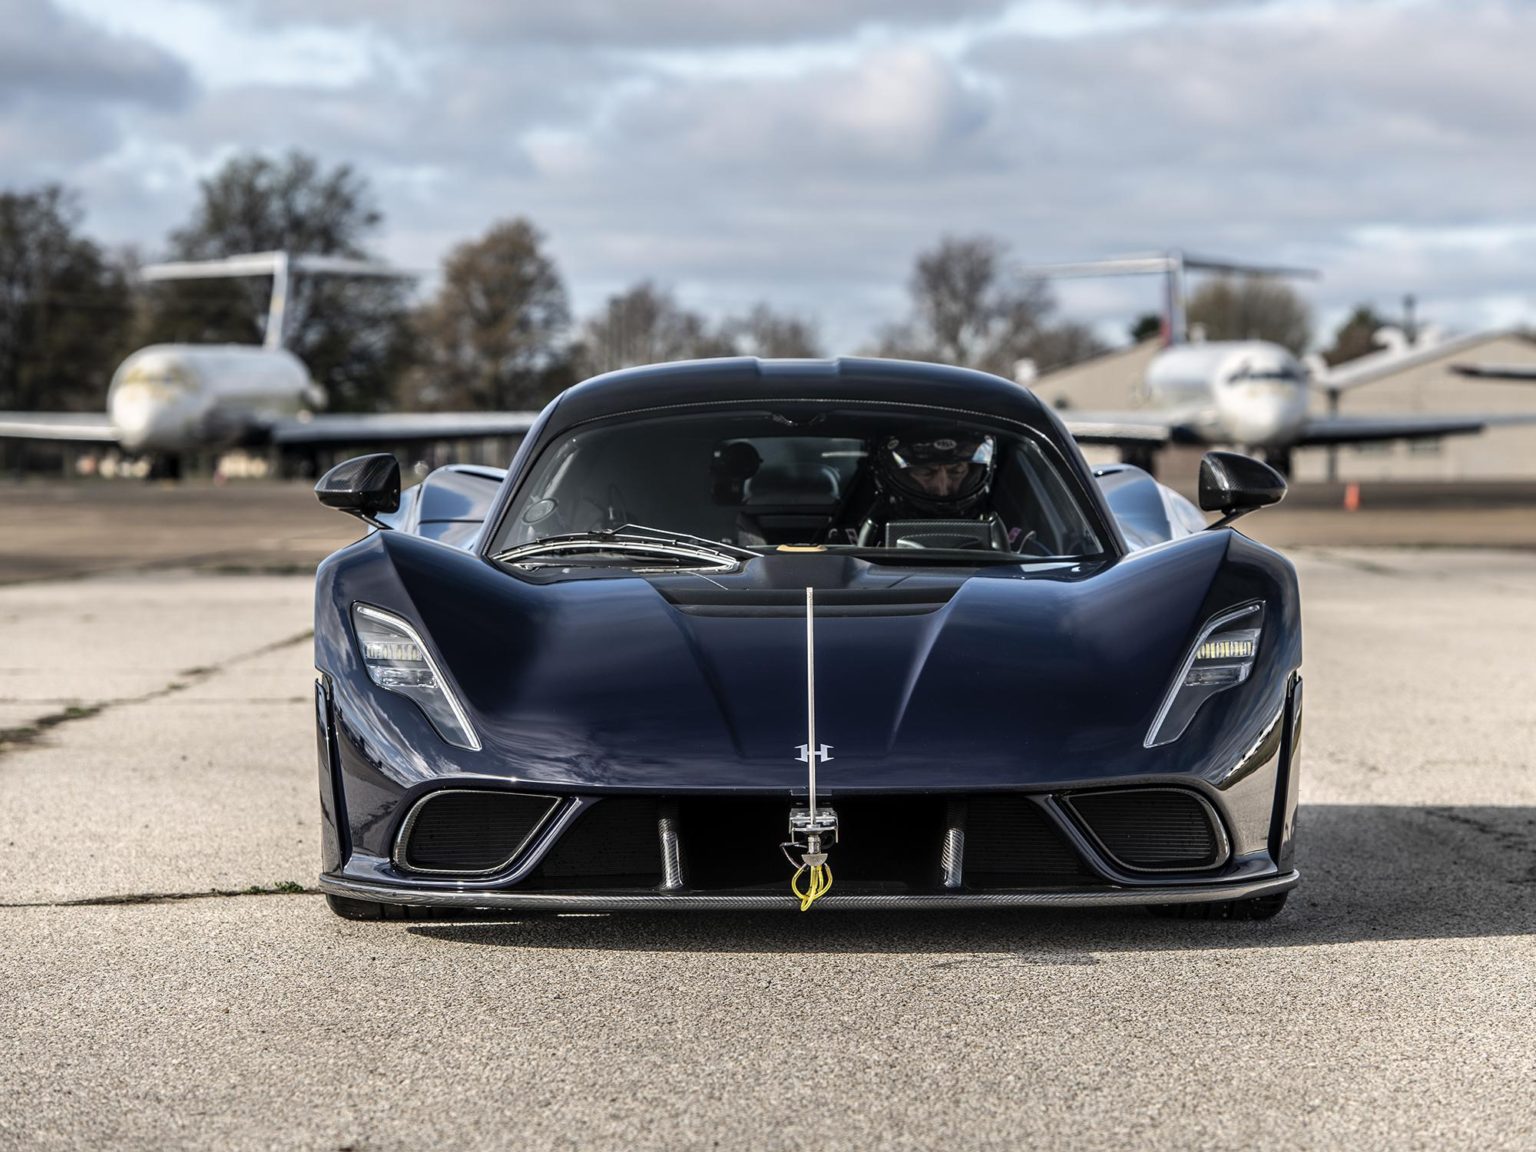 The Hennessey Venom F5 was recently tested at the former Eaker Air Force Base.